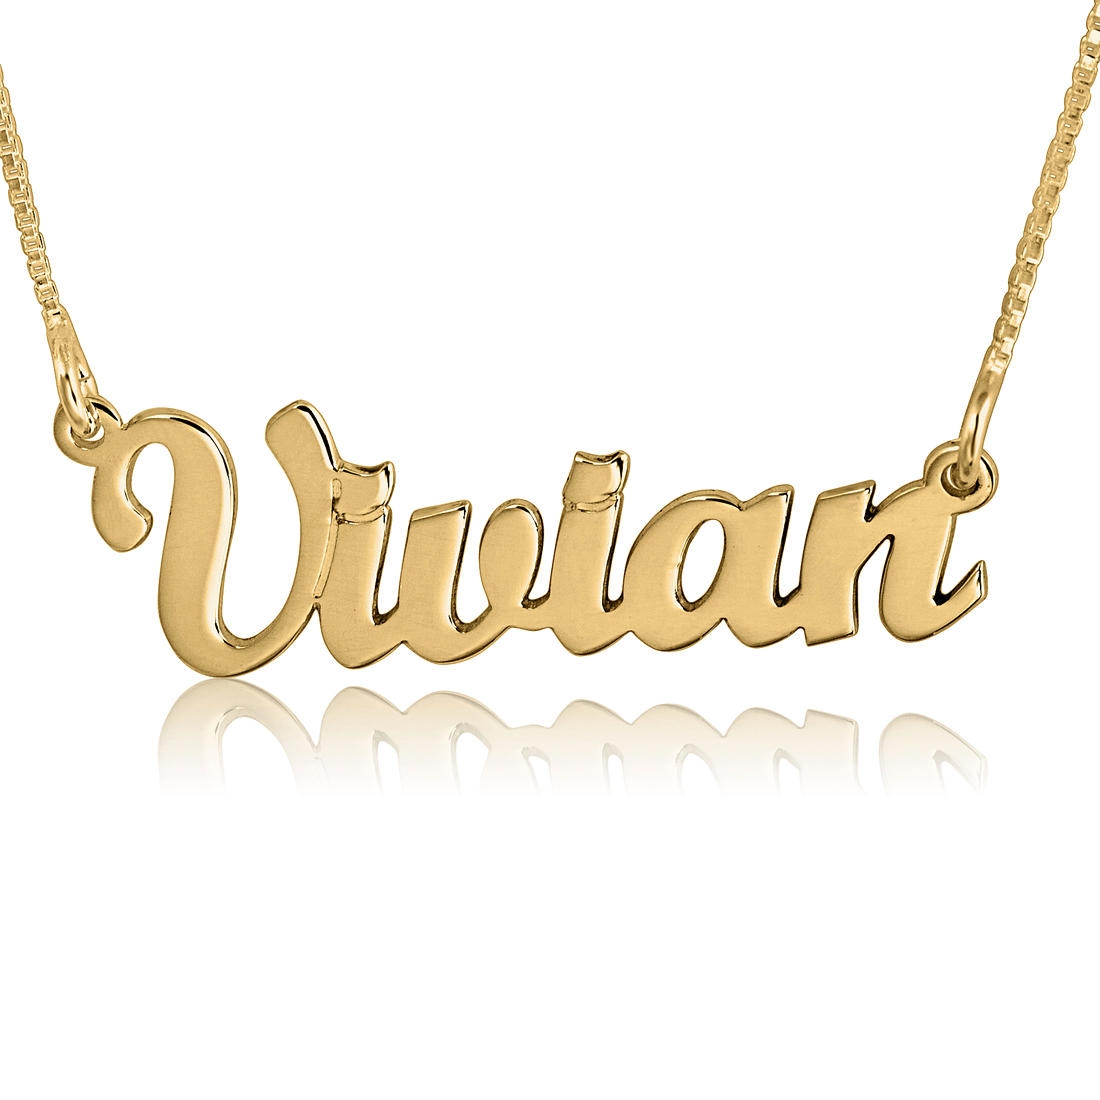 Name Necklace, Vivian Script Classic Name Necklace, 24k Gold Plated - 1